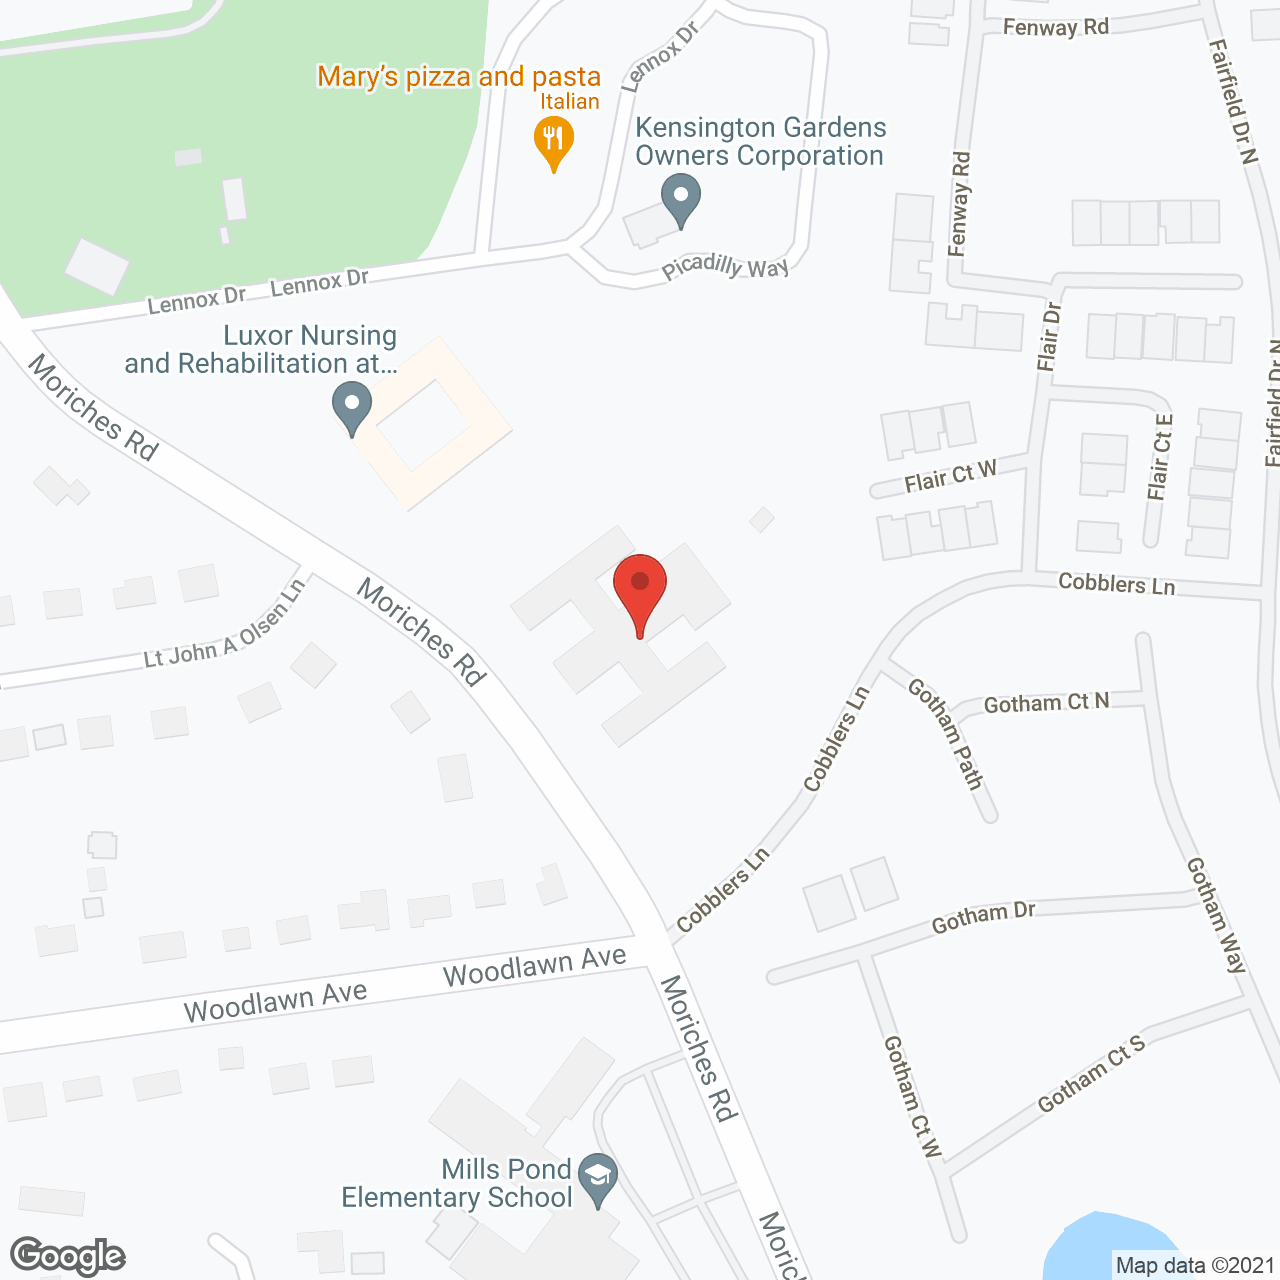 St. James Healthcare Ctr in google map